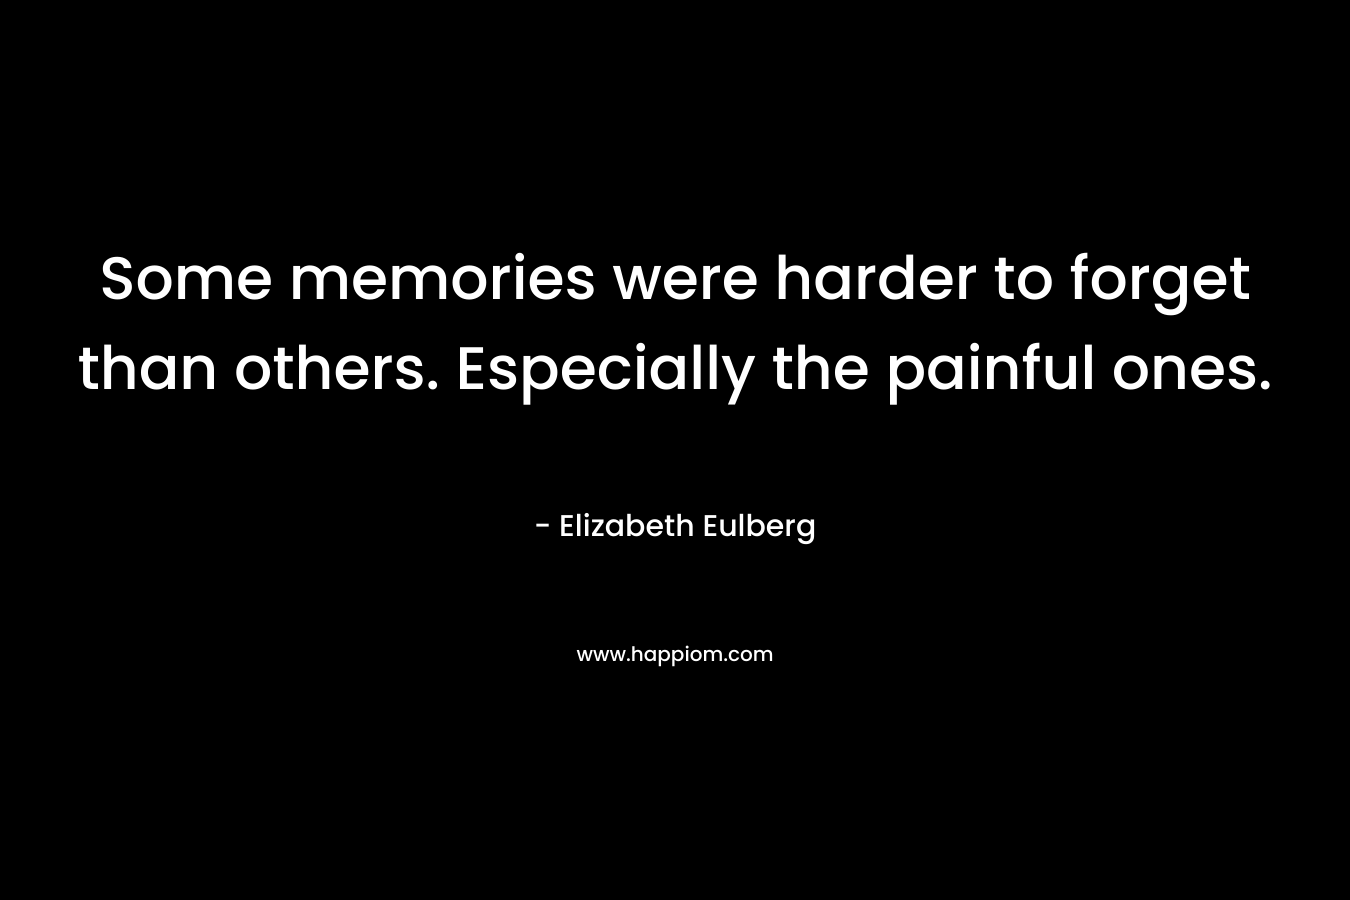 Some memories were harder to forget than others. Especially the painful ones.